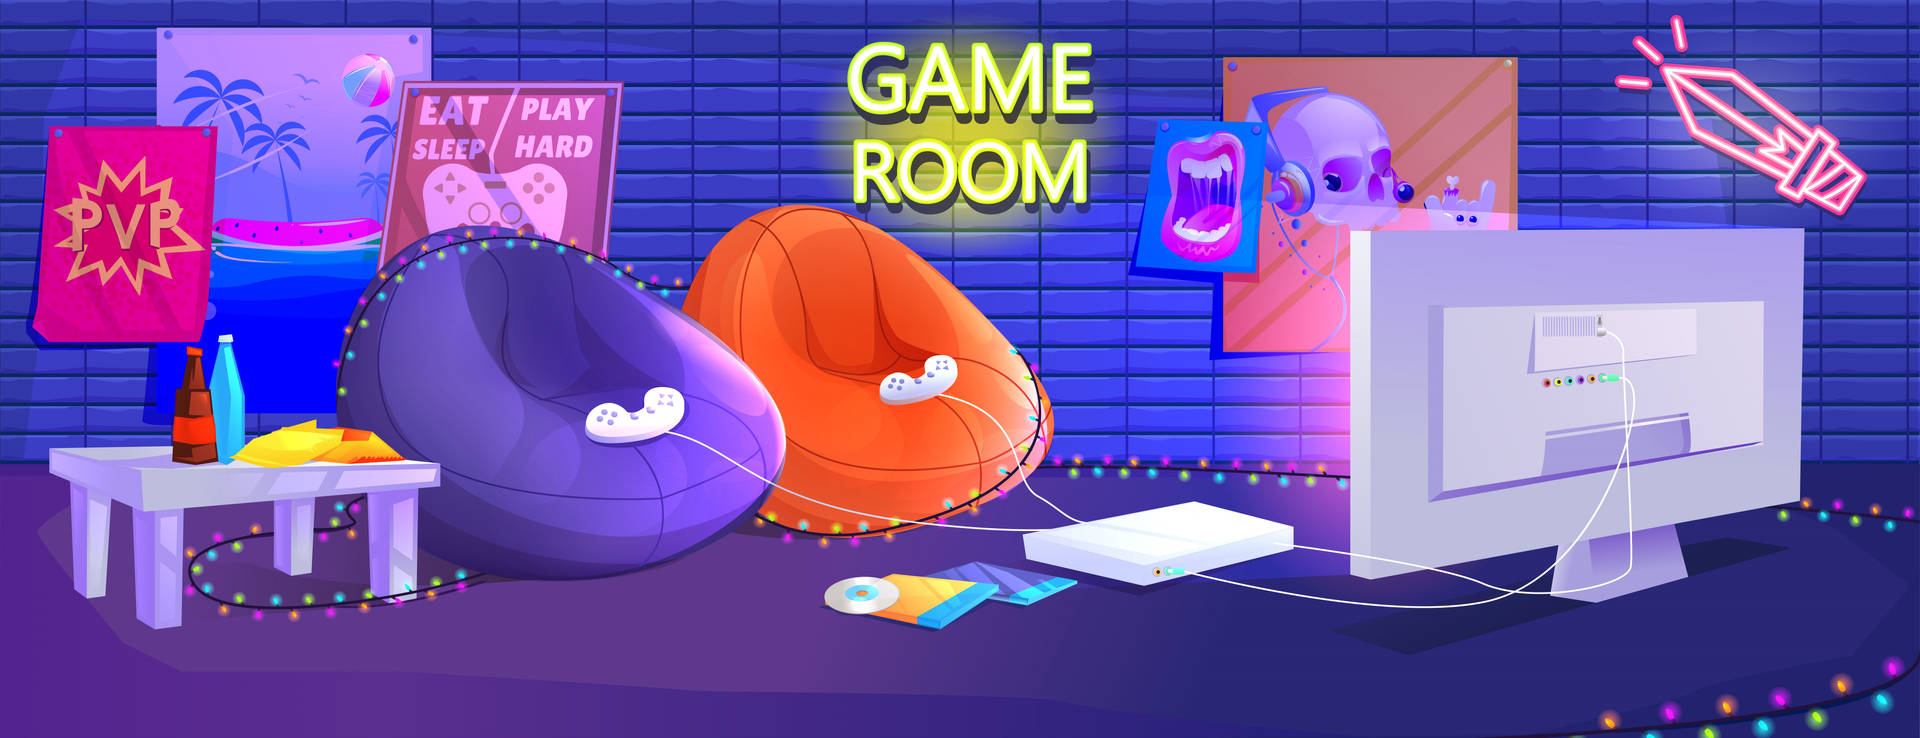 Cute And Colorful Gaming Room Art Background